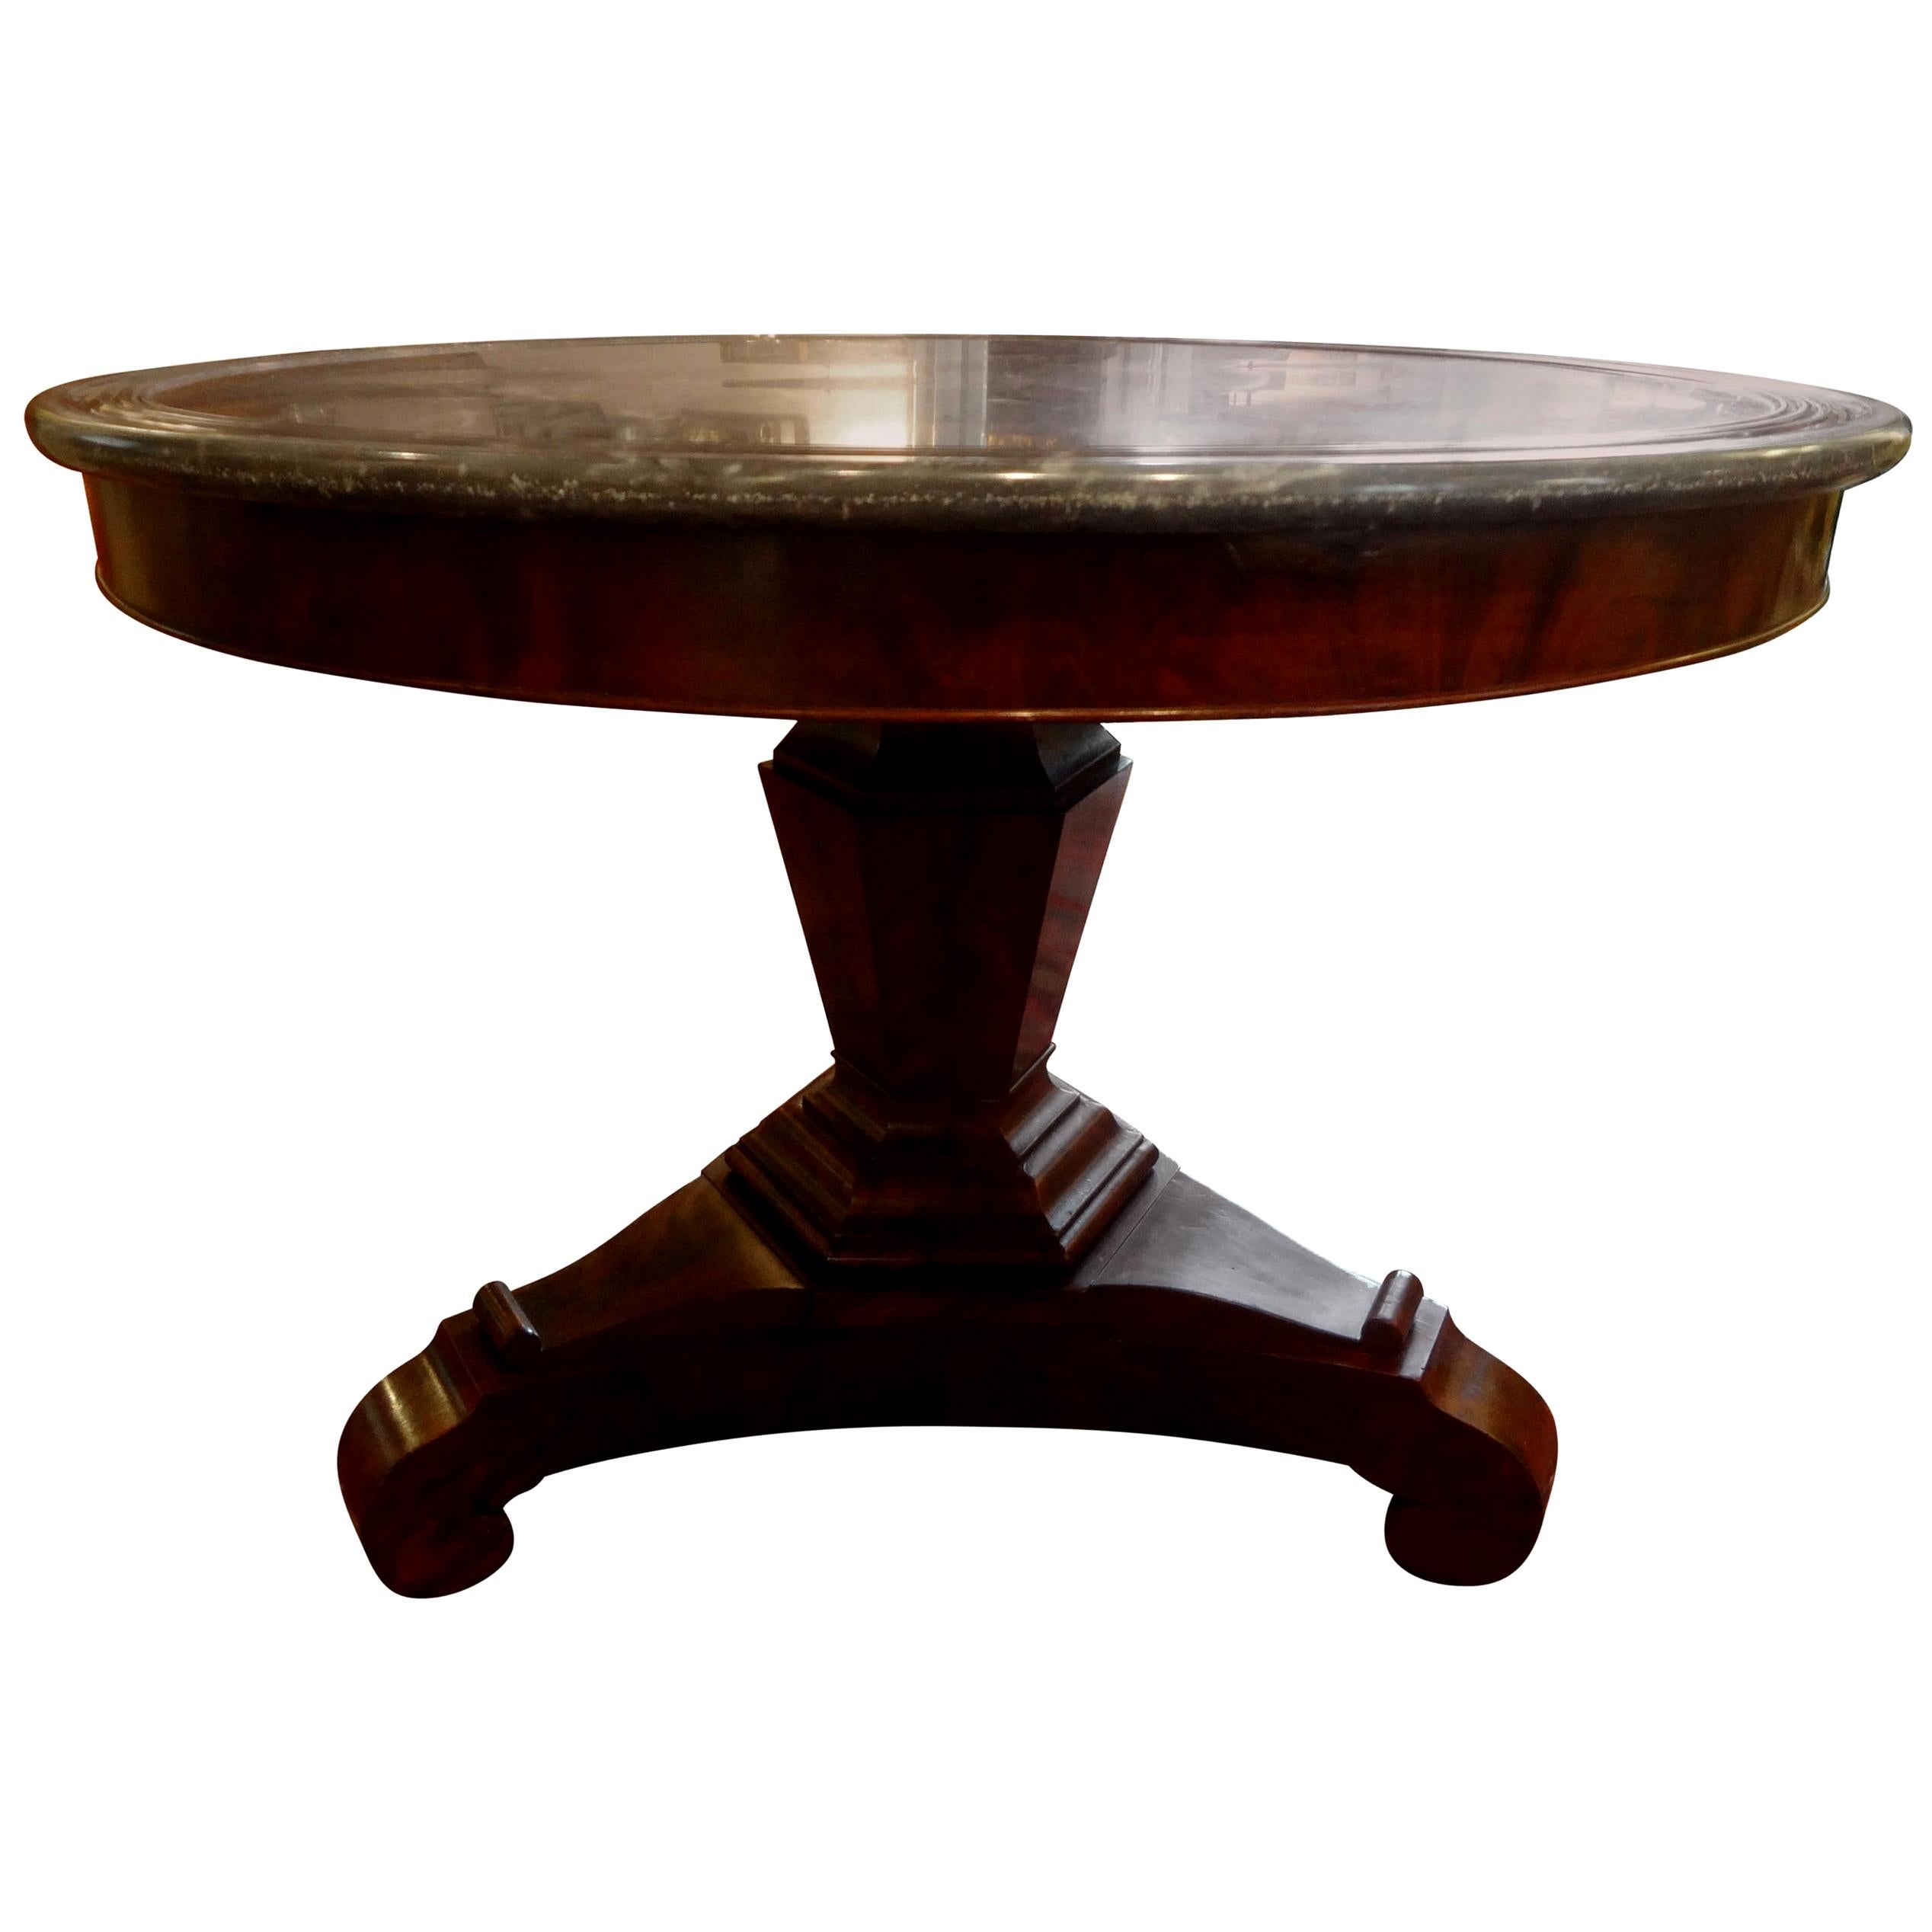 19th Century French Restauration Period Walnut Center Table with Gray Marble Top